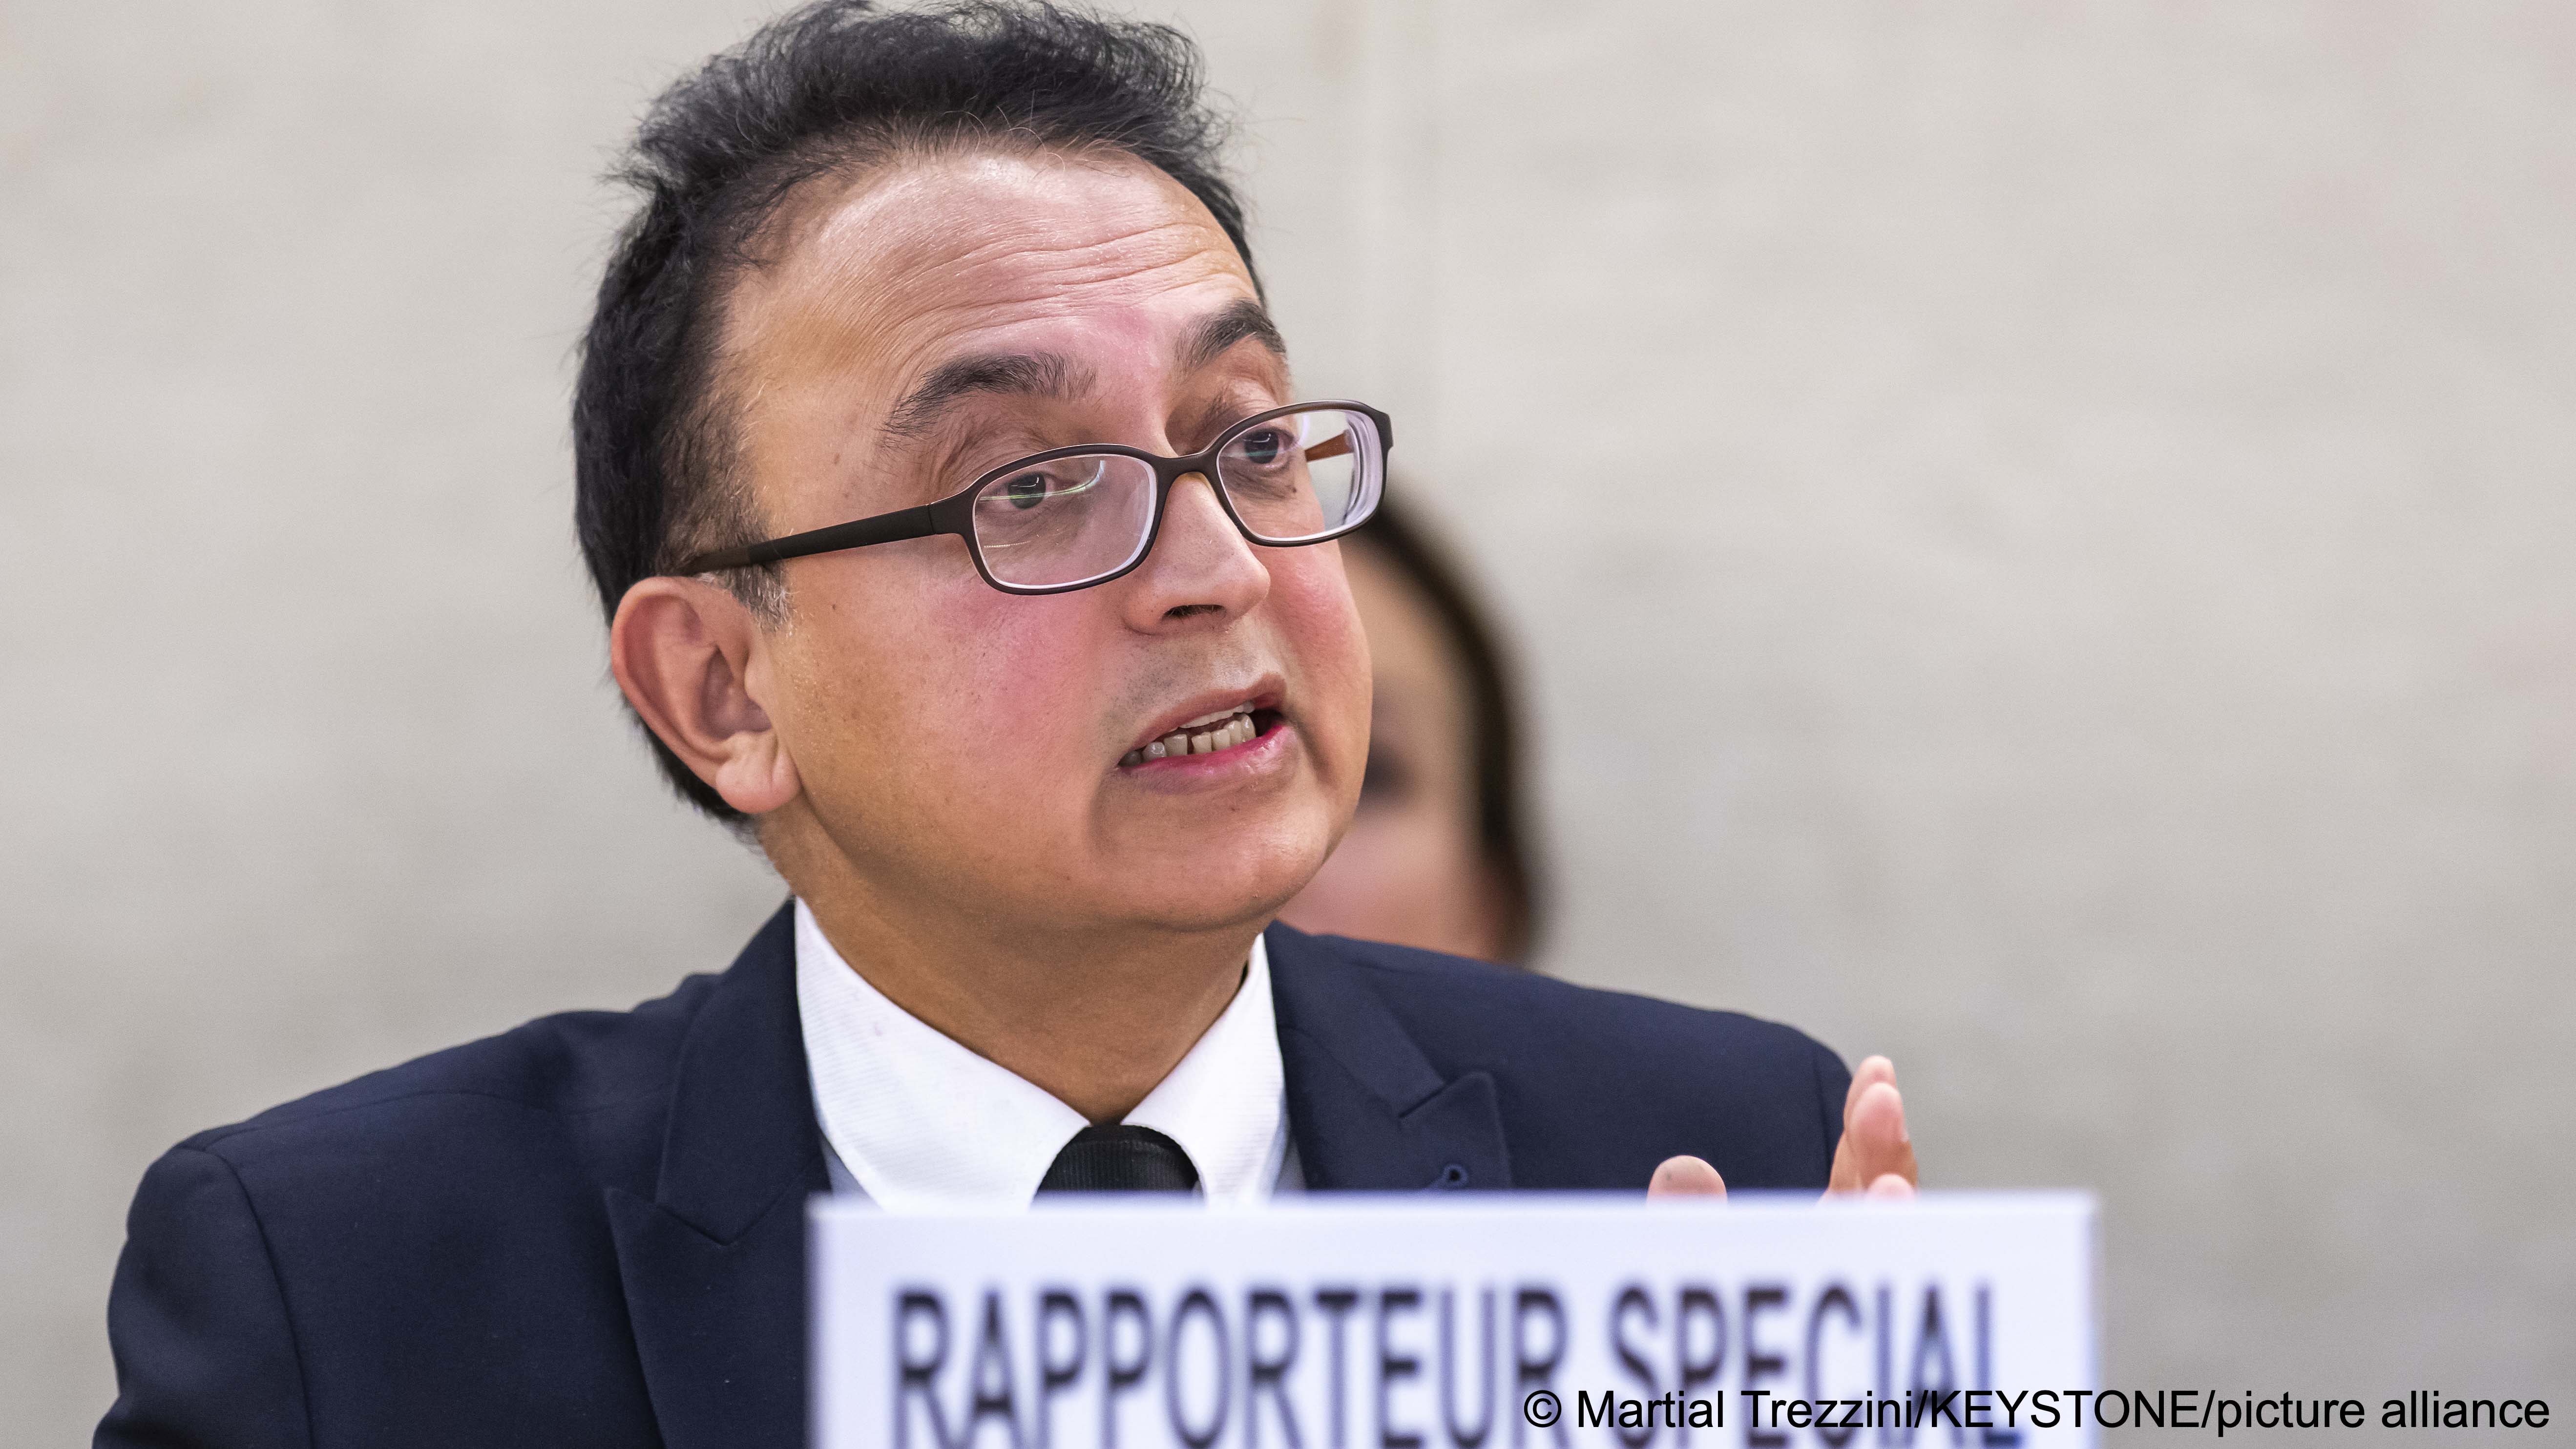 Javaid Rehman, Special Rapporteur on the human rights situation in the Islamic Republic of Iran, gestures as he speaks